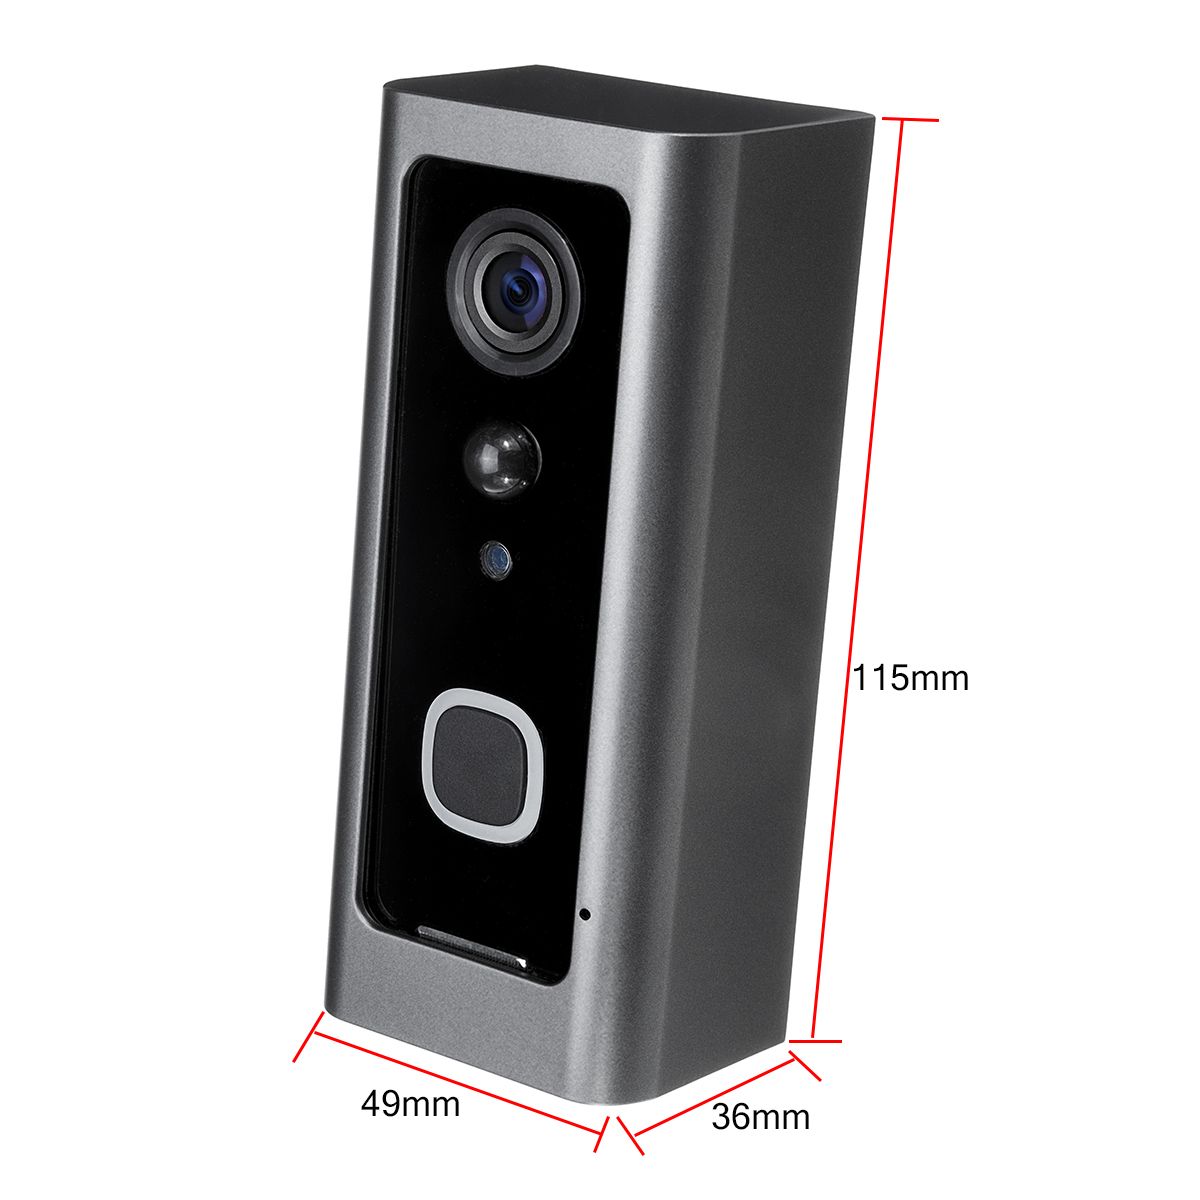 Smart-WiFi-Doorbell-Camera-Video-Wireless-Remote-Door-Bell-CCTV-Chime-Phone-Remote-Video-Monitoring--1587161